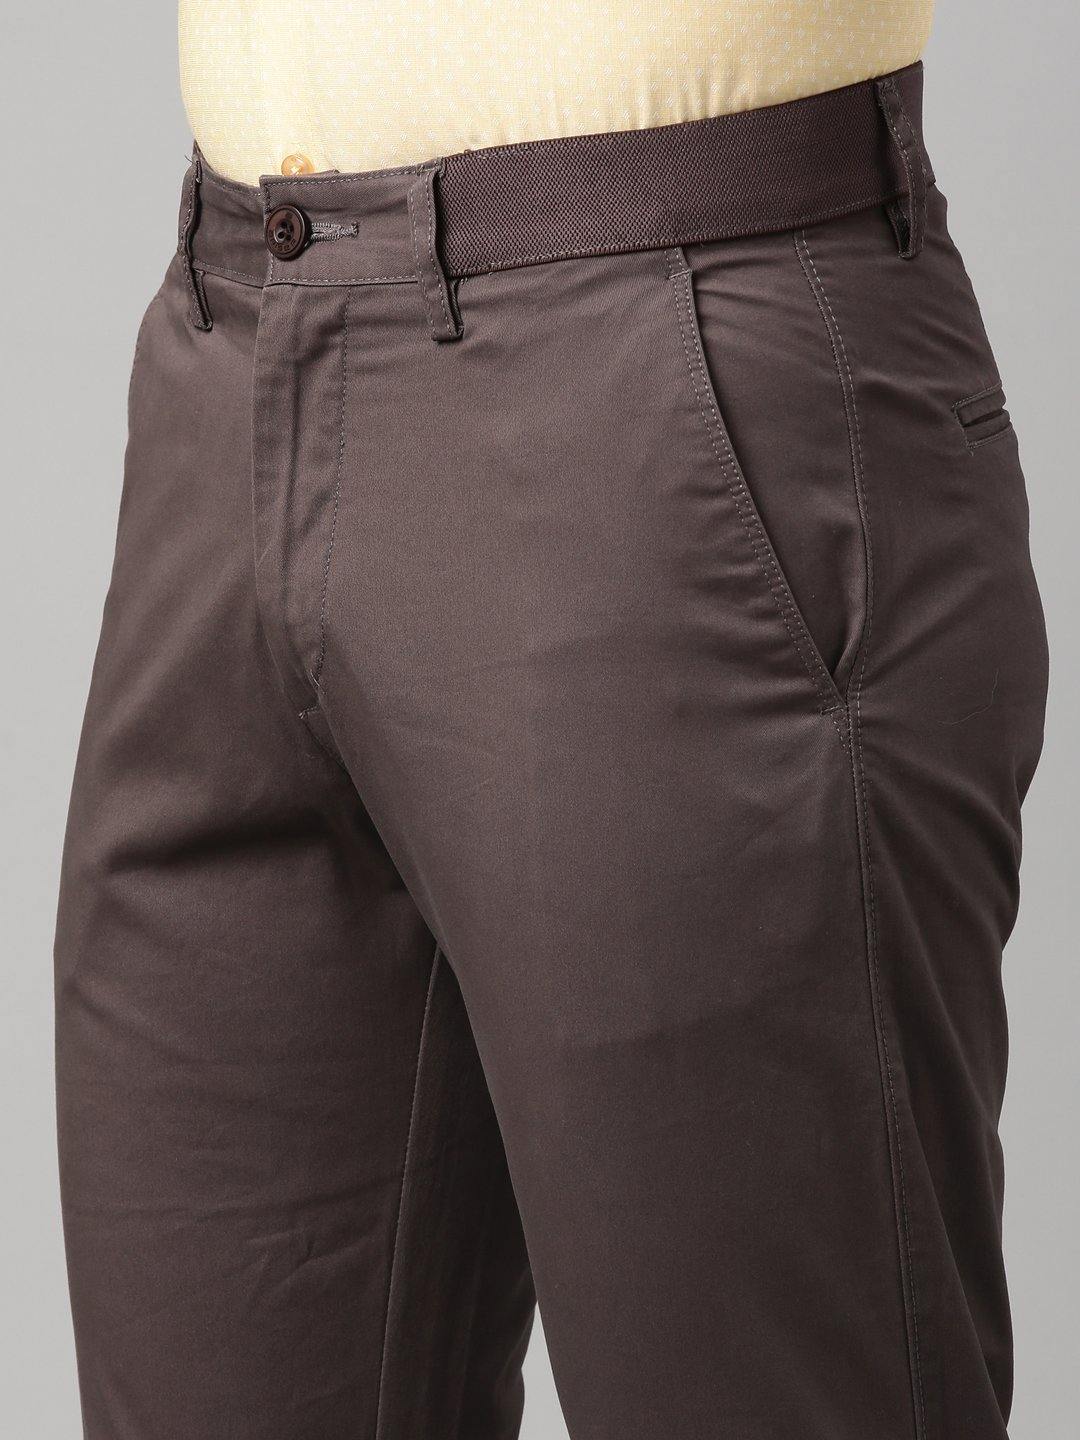 Mens Fully Elasticated Waist Trousers Button or Velcro Fastening  Care  Clothing